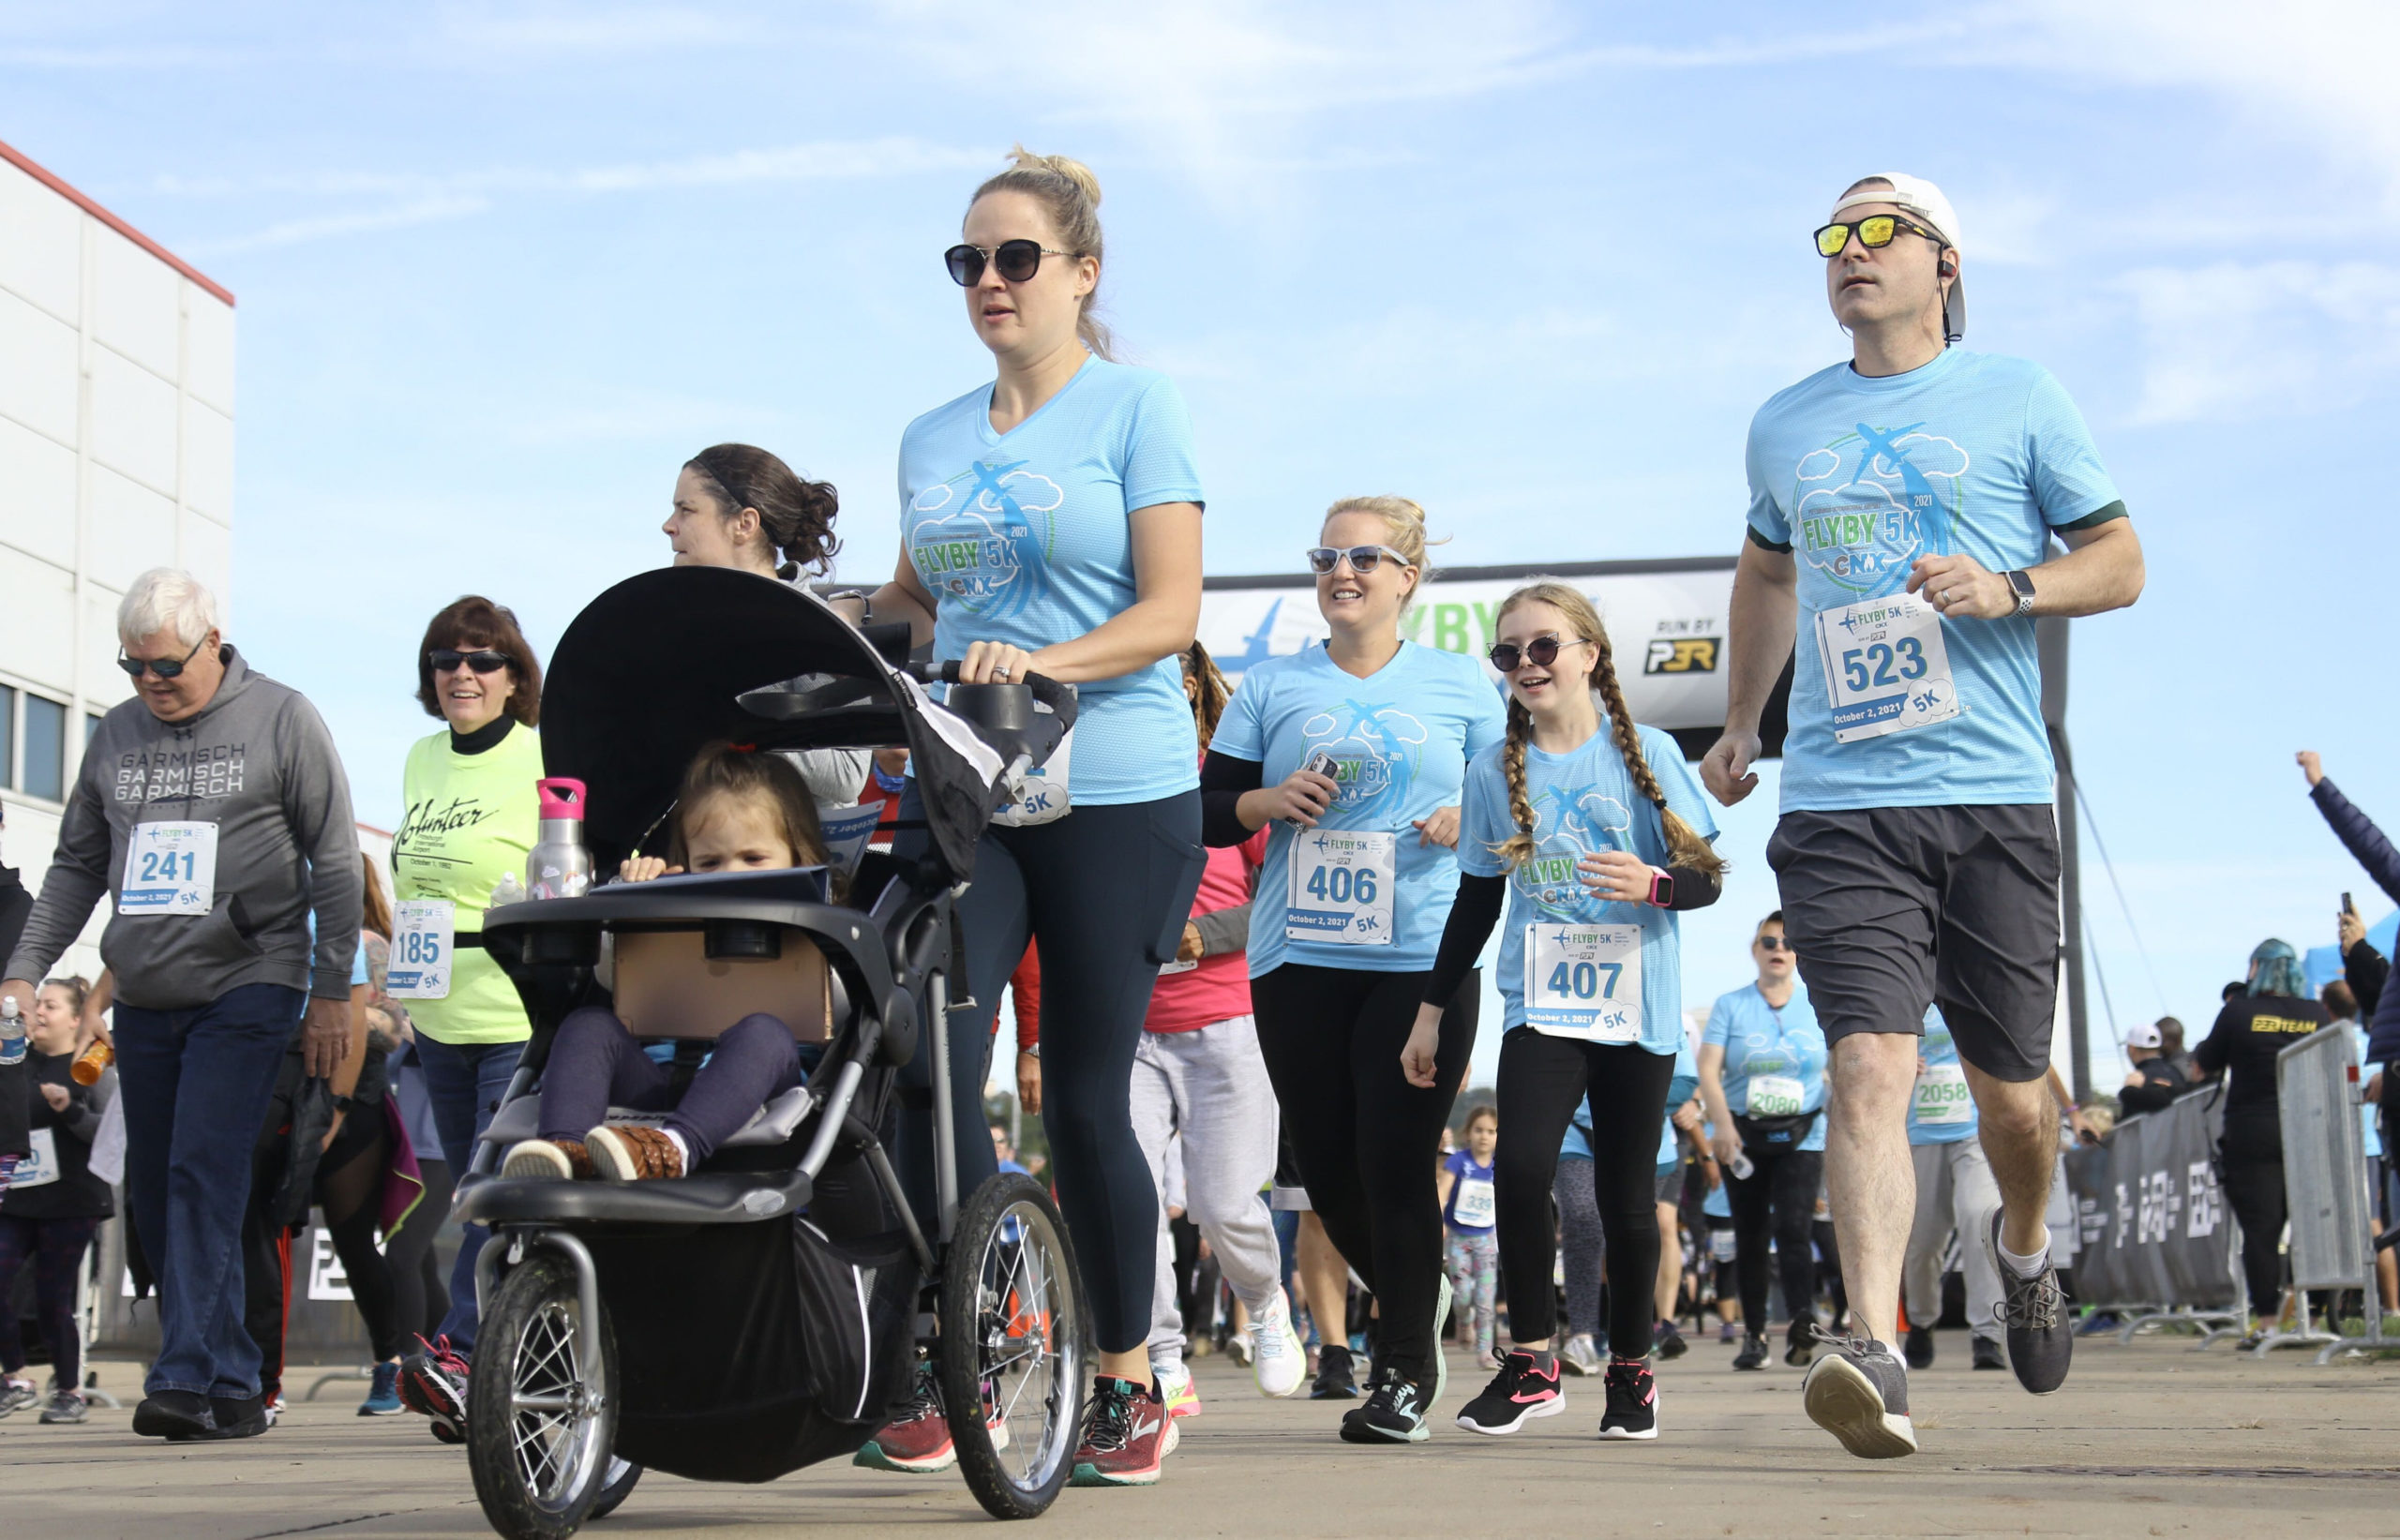 More than 1,200 Runners Take Flight at the FlyBy 5K and 2Mile Fun Run